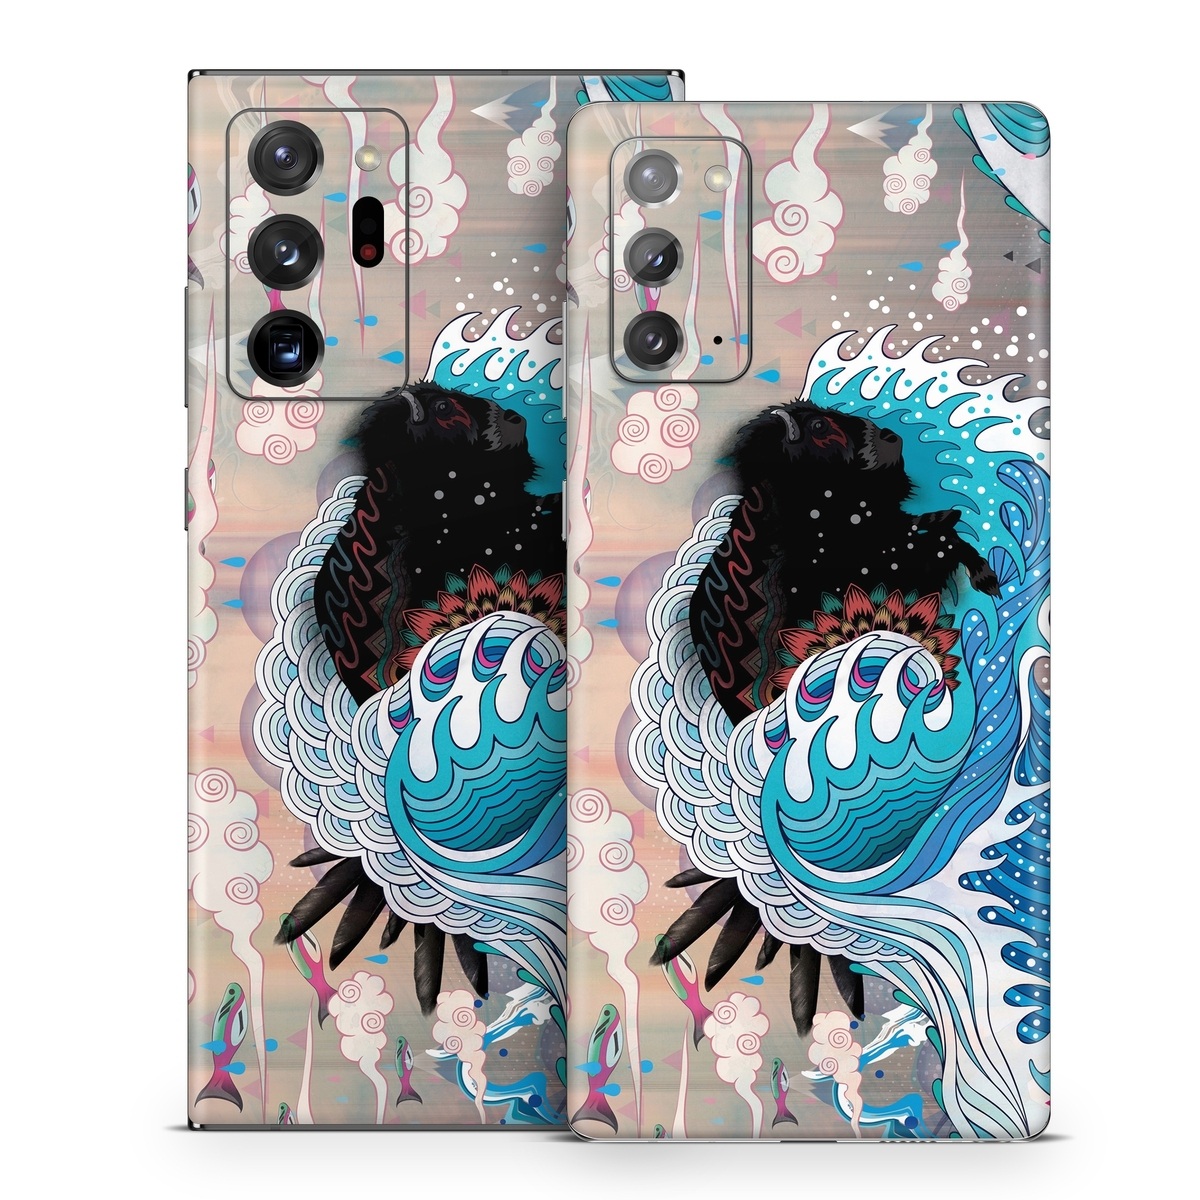 Samsung Galaxy Note 20 Series Skin design of Blue, Turquoise, Illustration, Aqua, Graphic design, Pattern, Art, Design, Graphics, Visual arts, with gray, blue, black, pink, white colors